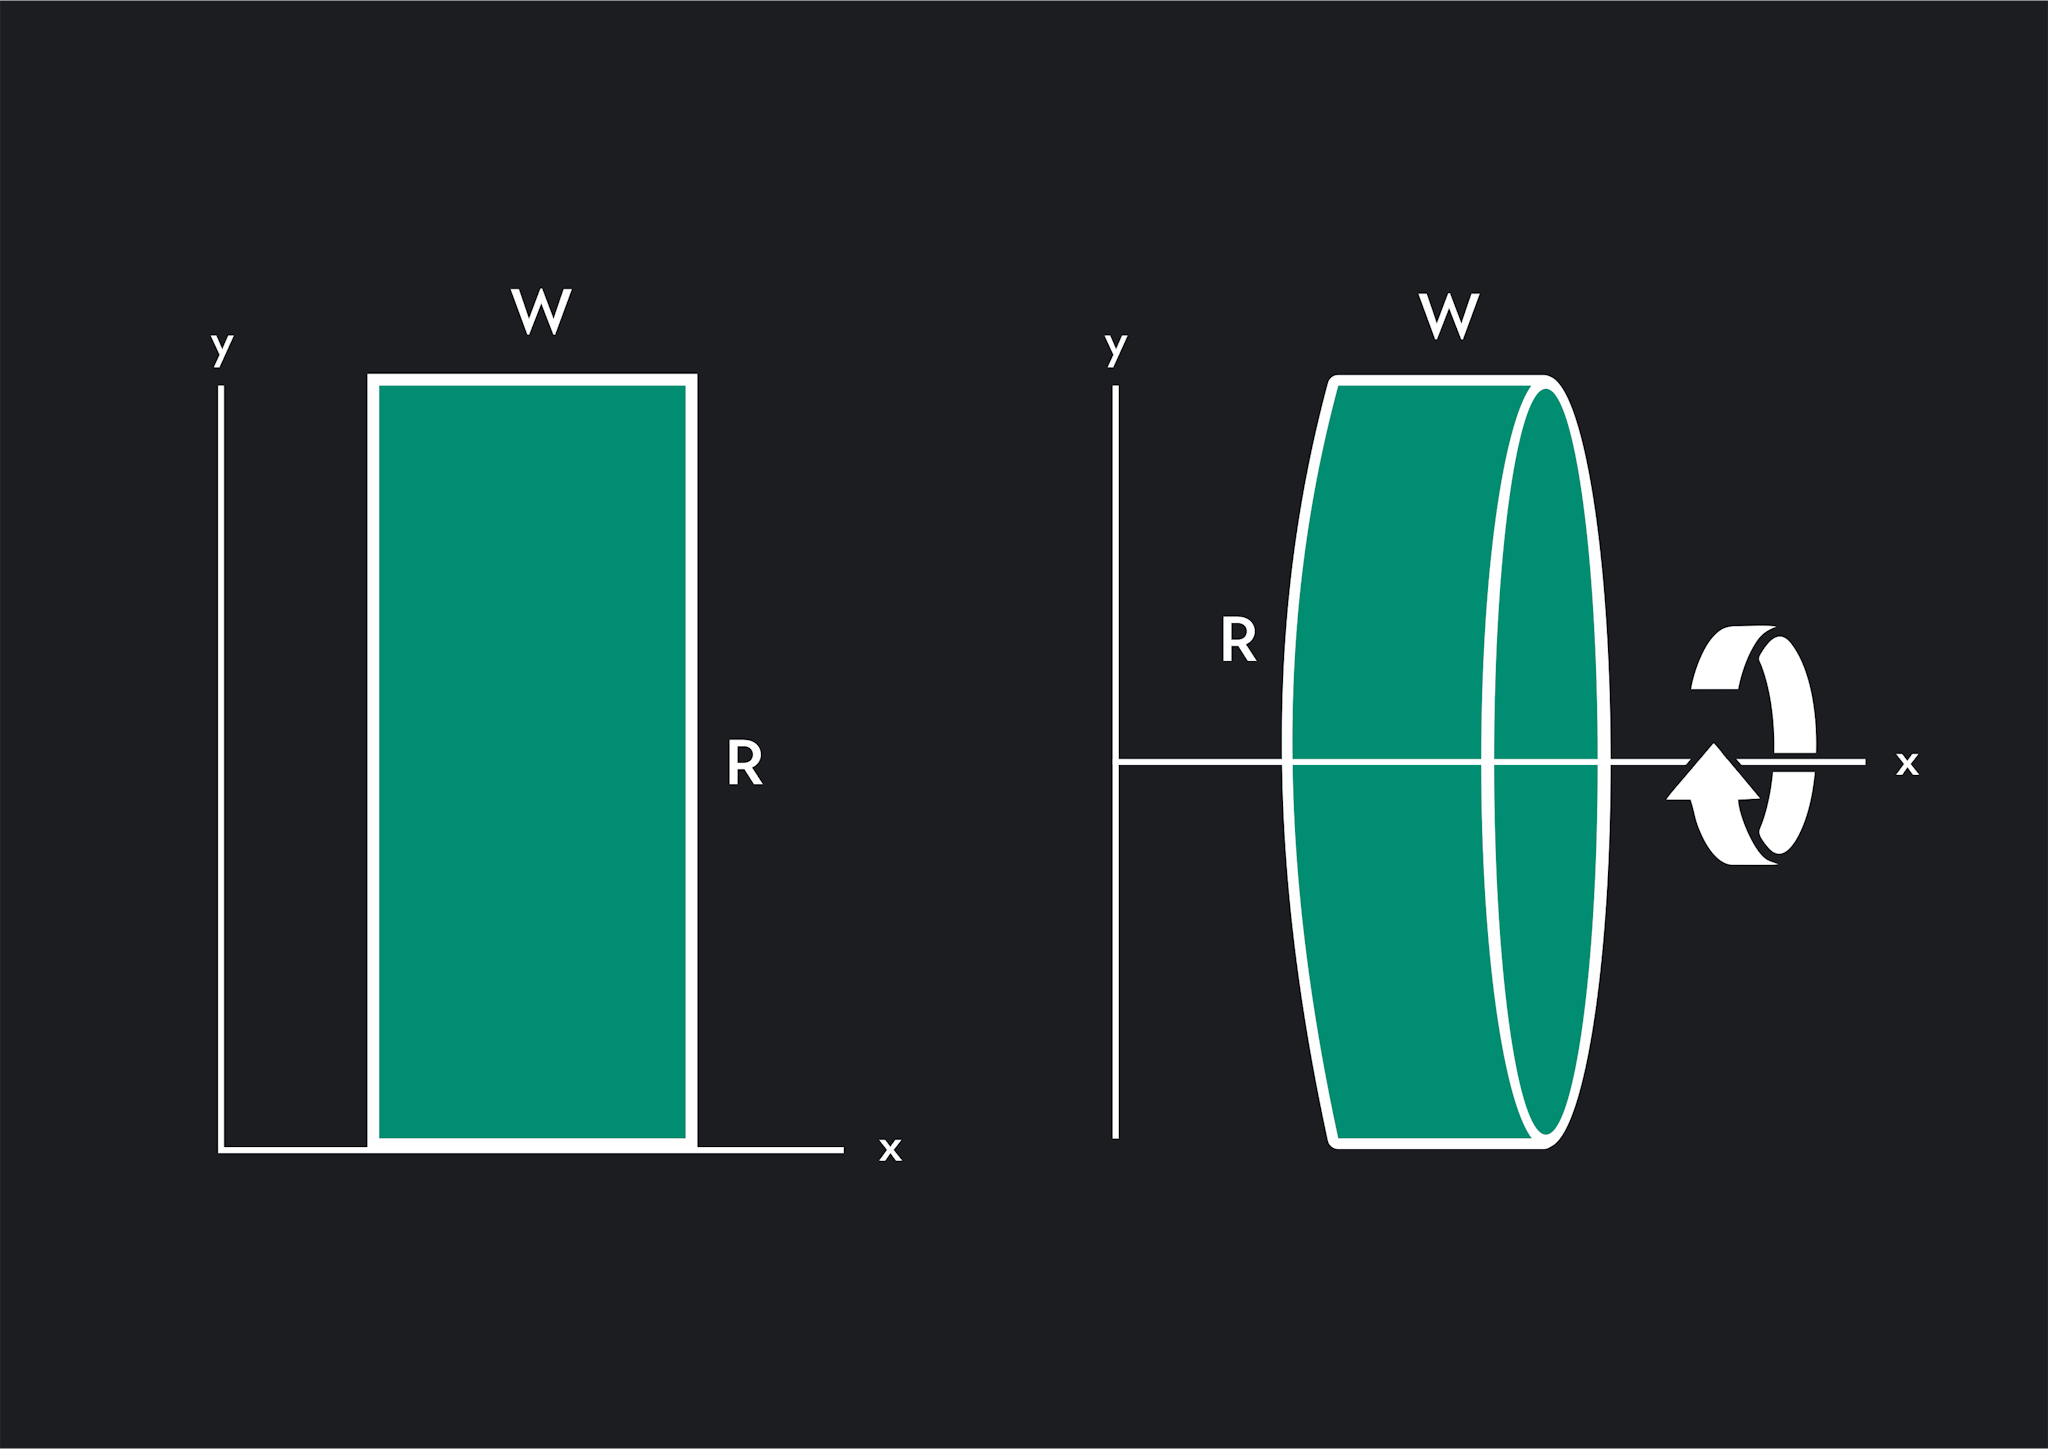 In the graphic, W is the width of the rectangle and R is the height of the rectangle. R becomes the radius of the disk when the rectangle is revolved around the x-axis